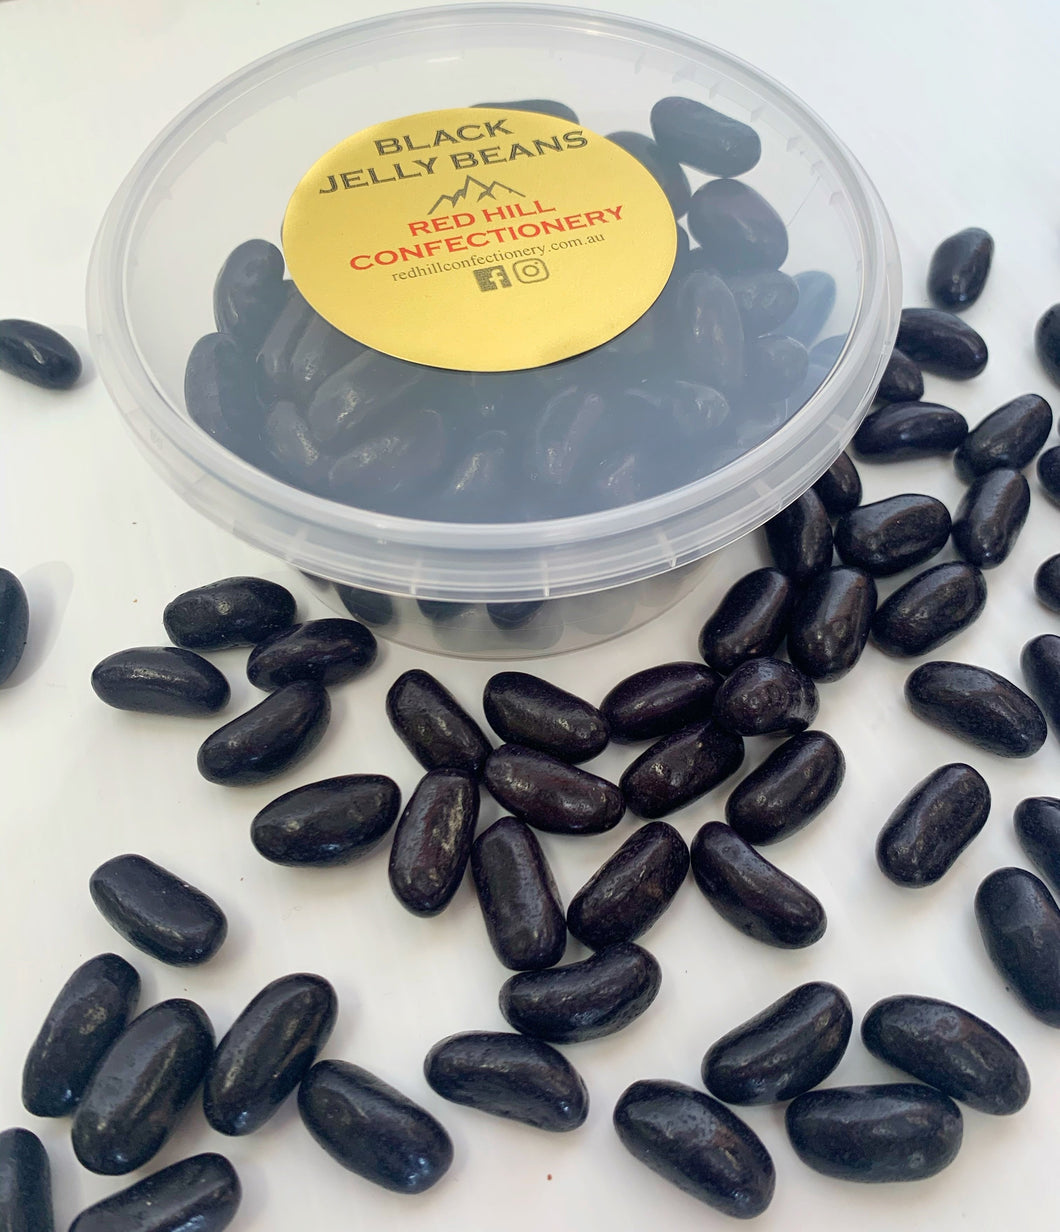 Red Hill Confectionery - Black Jelly Beans 200g Tub